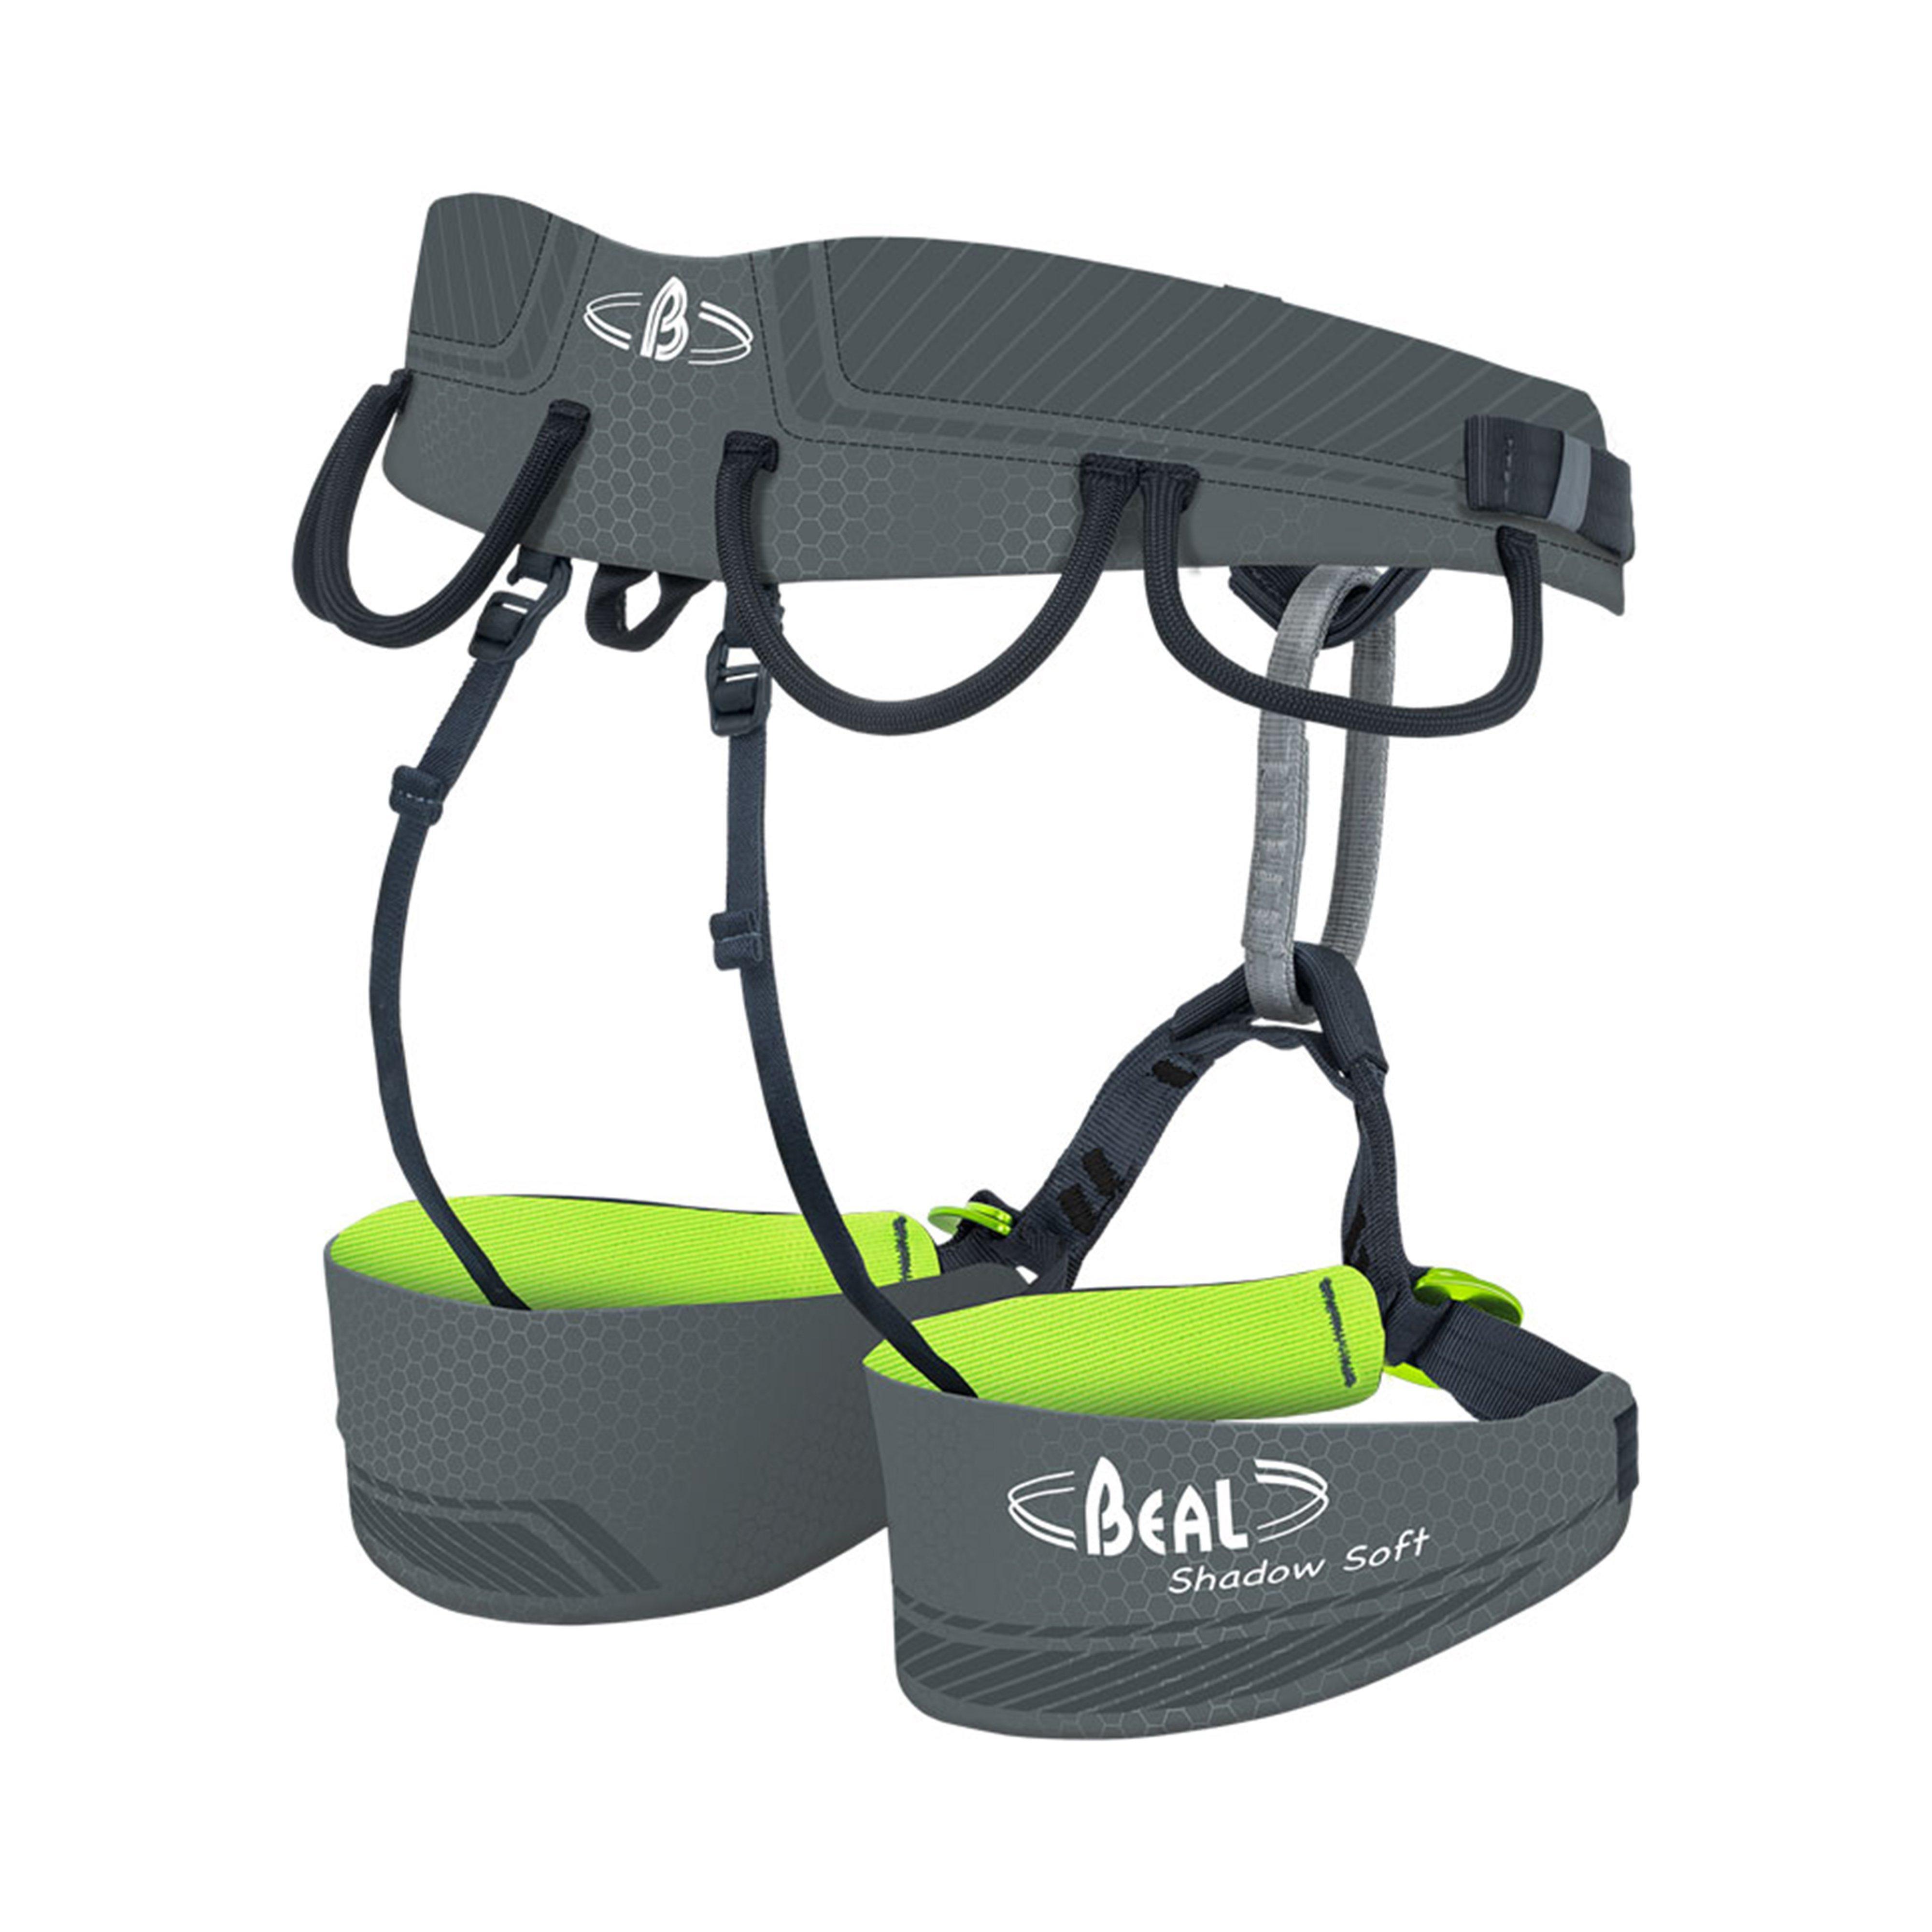 Beal Shadow Soft Climbing Harness Review